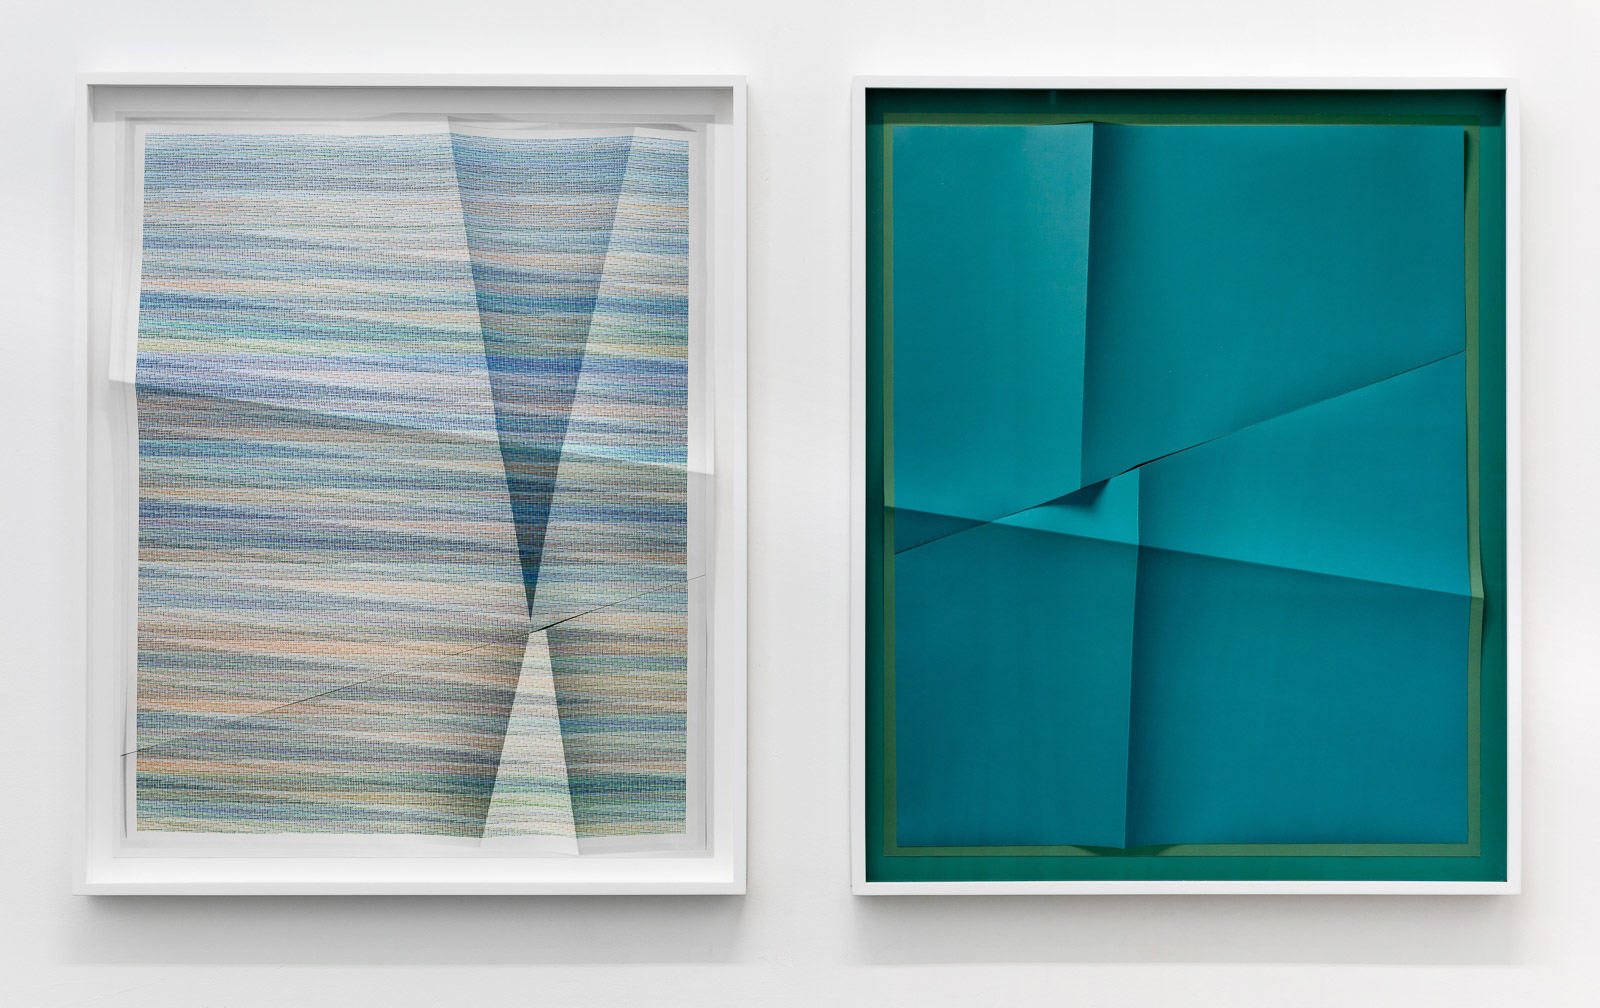 Untitled #292, 2014, Creased archival pigment print (unique), 24 x 30 inches each part